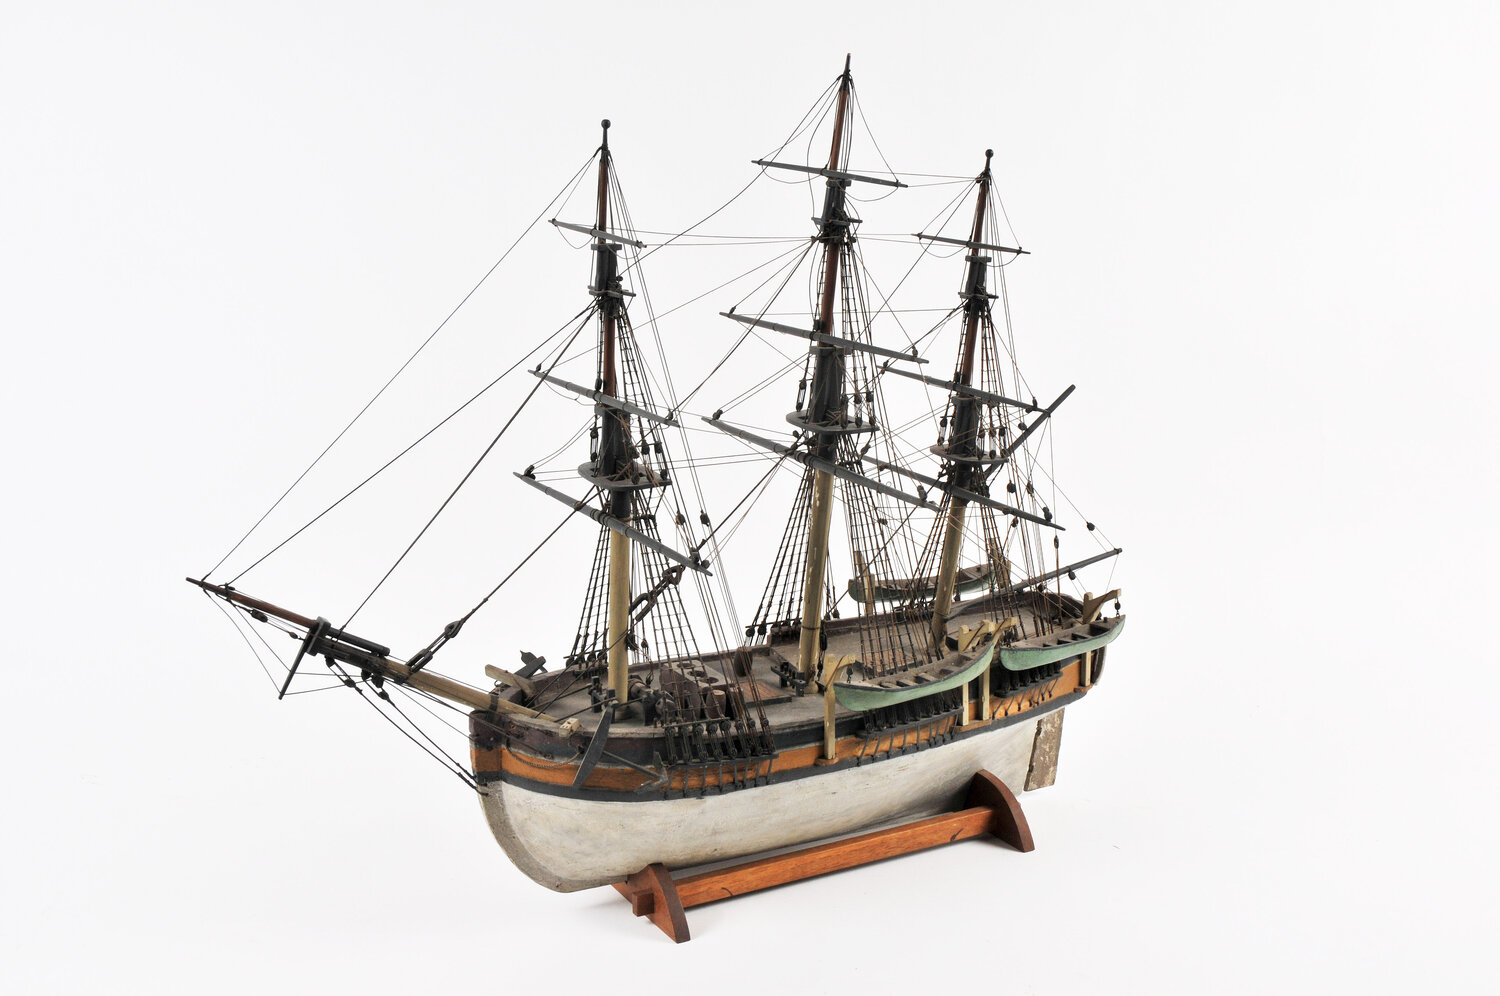 A whaleship model built in 1765.